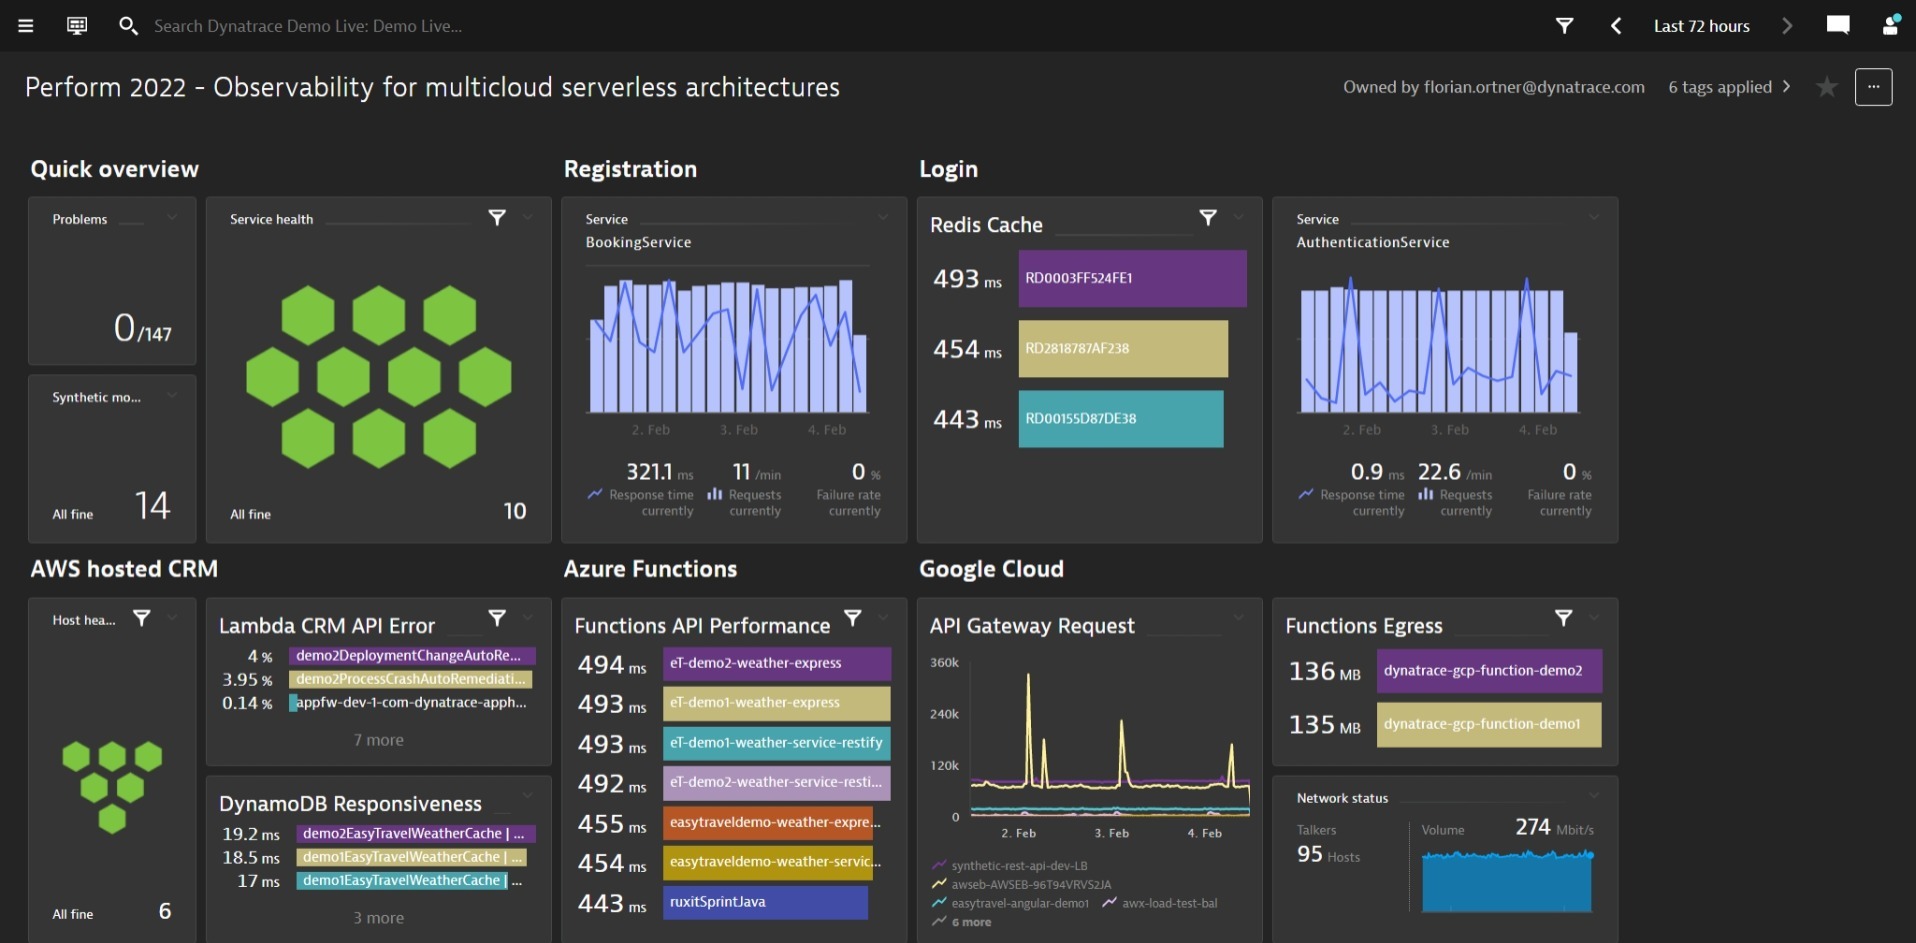 Multicloud serverless application dashboard at a glance